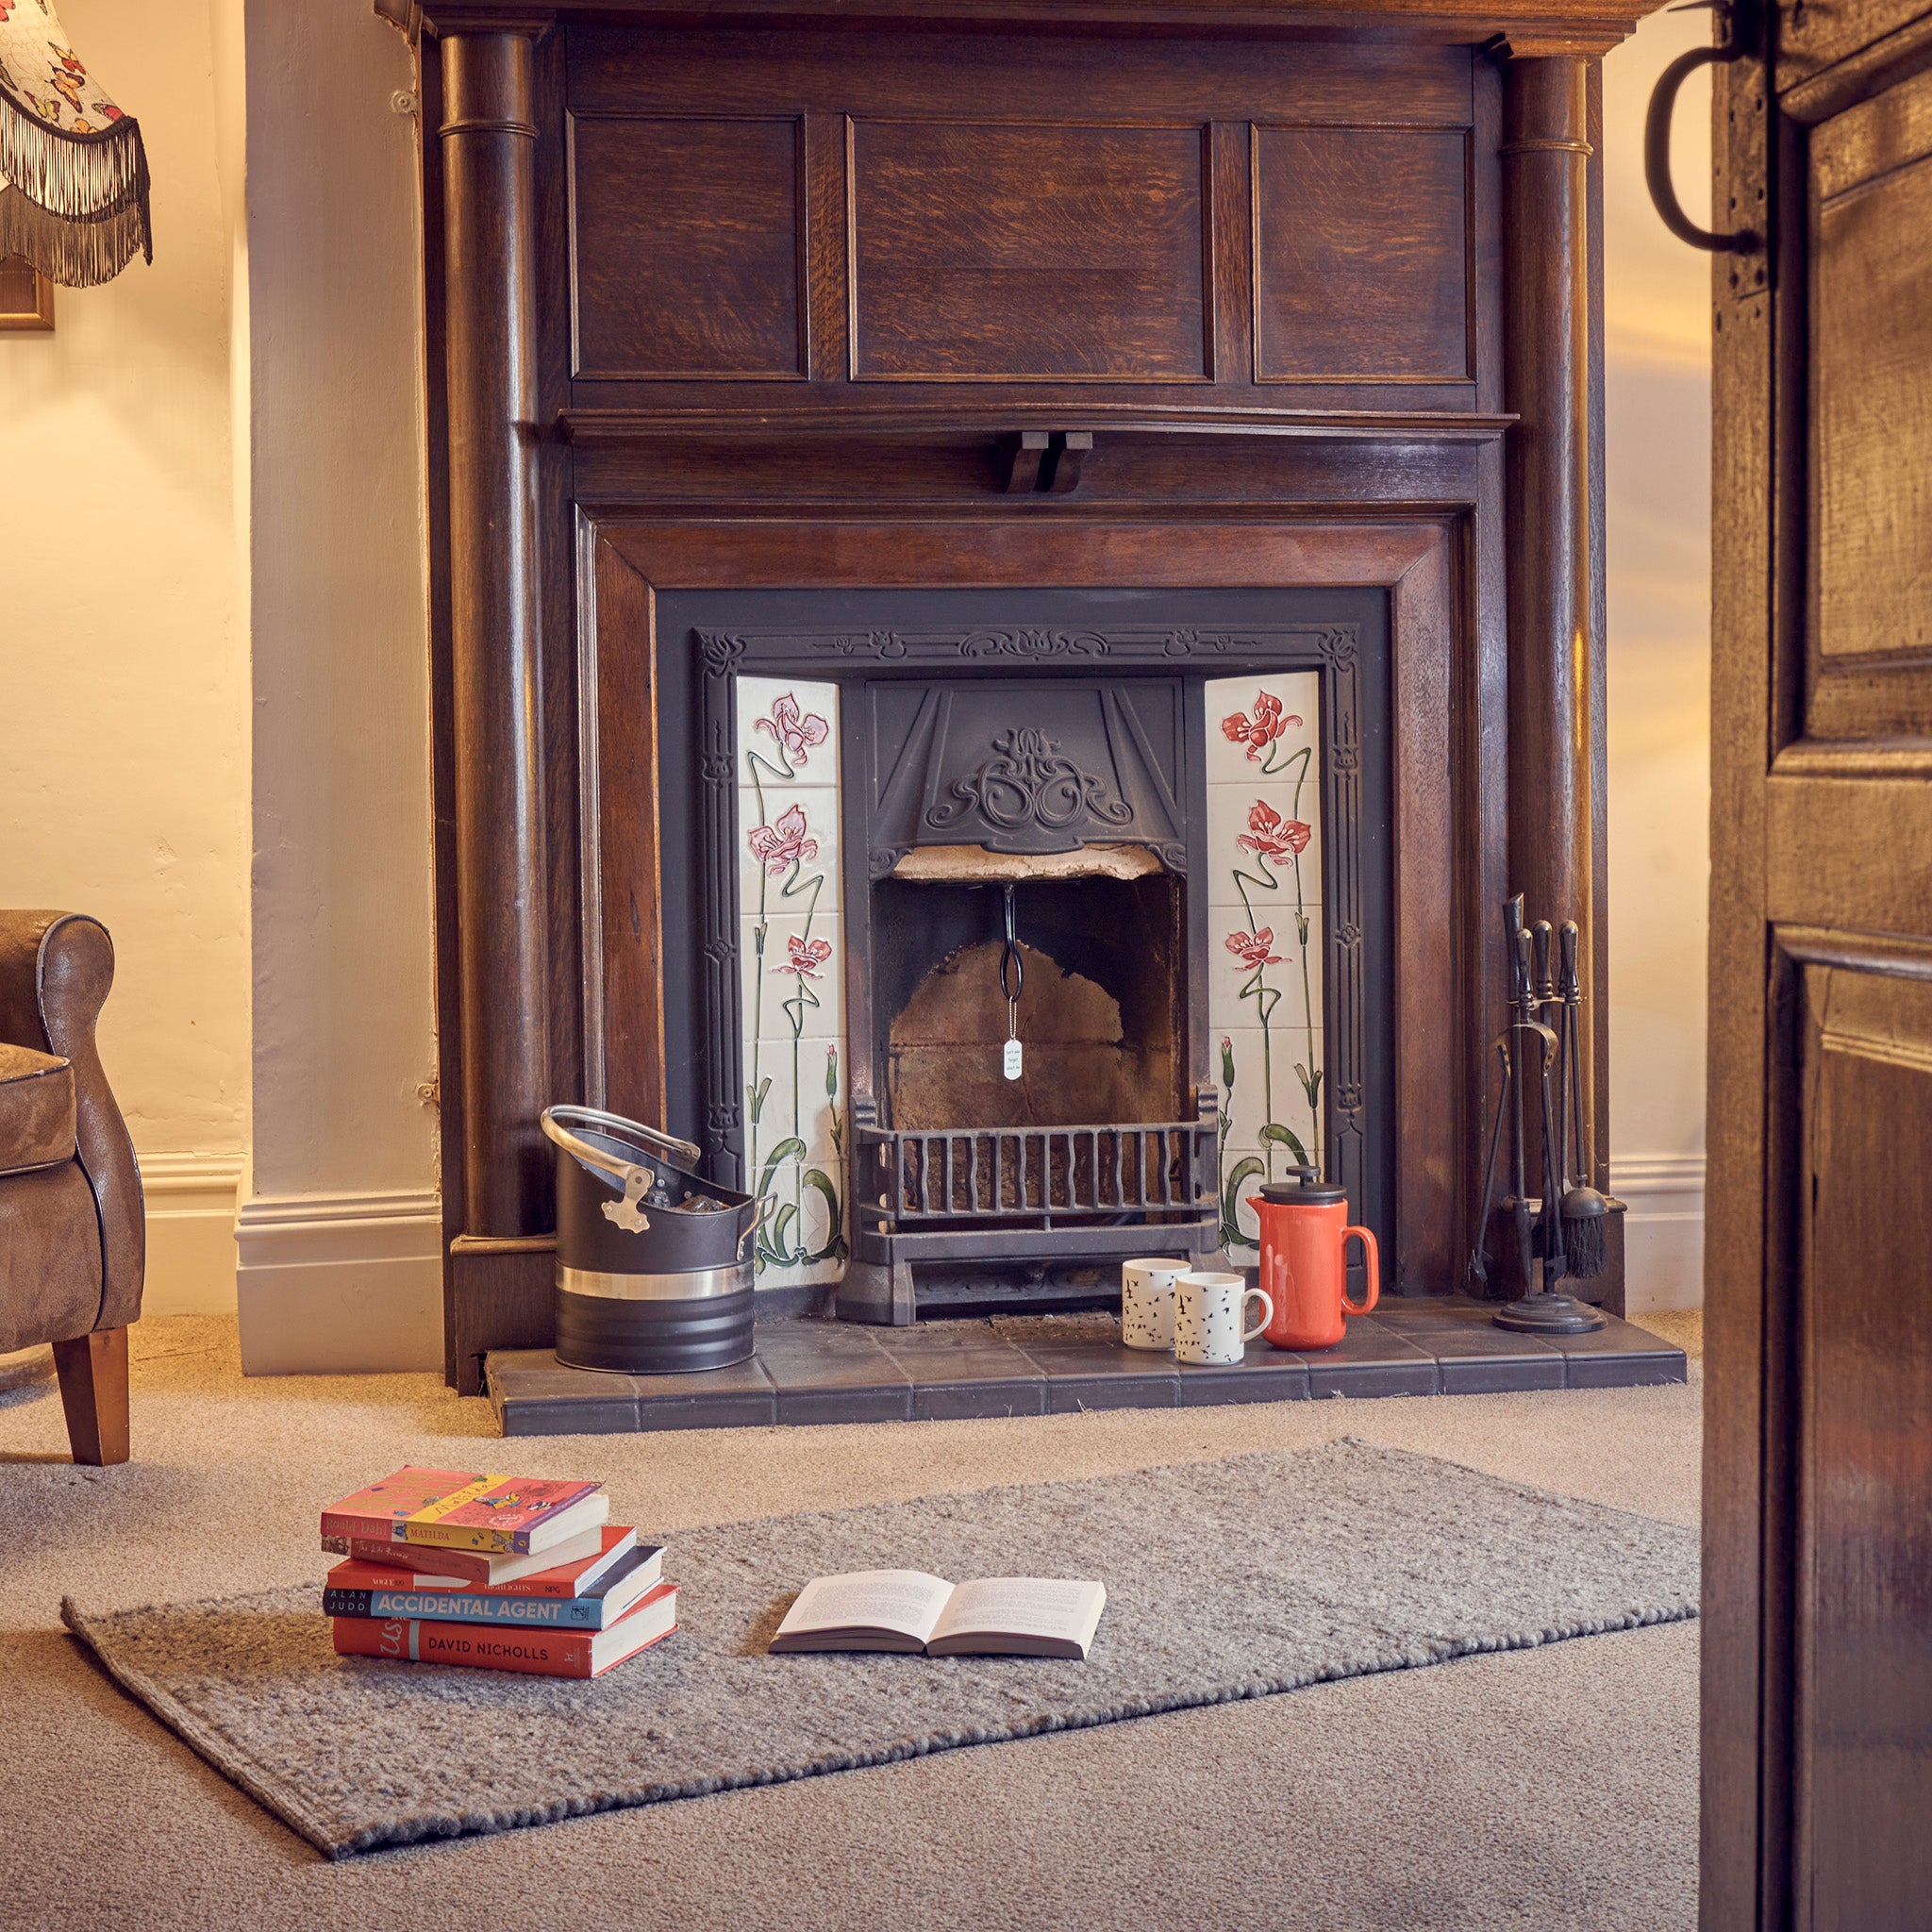 A fireplace with a chimney draught excluder inserted into the chimney flue